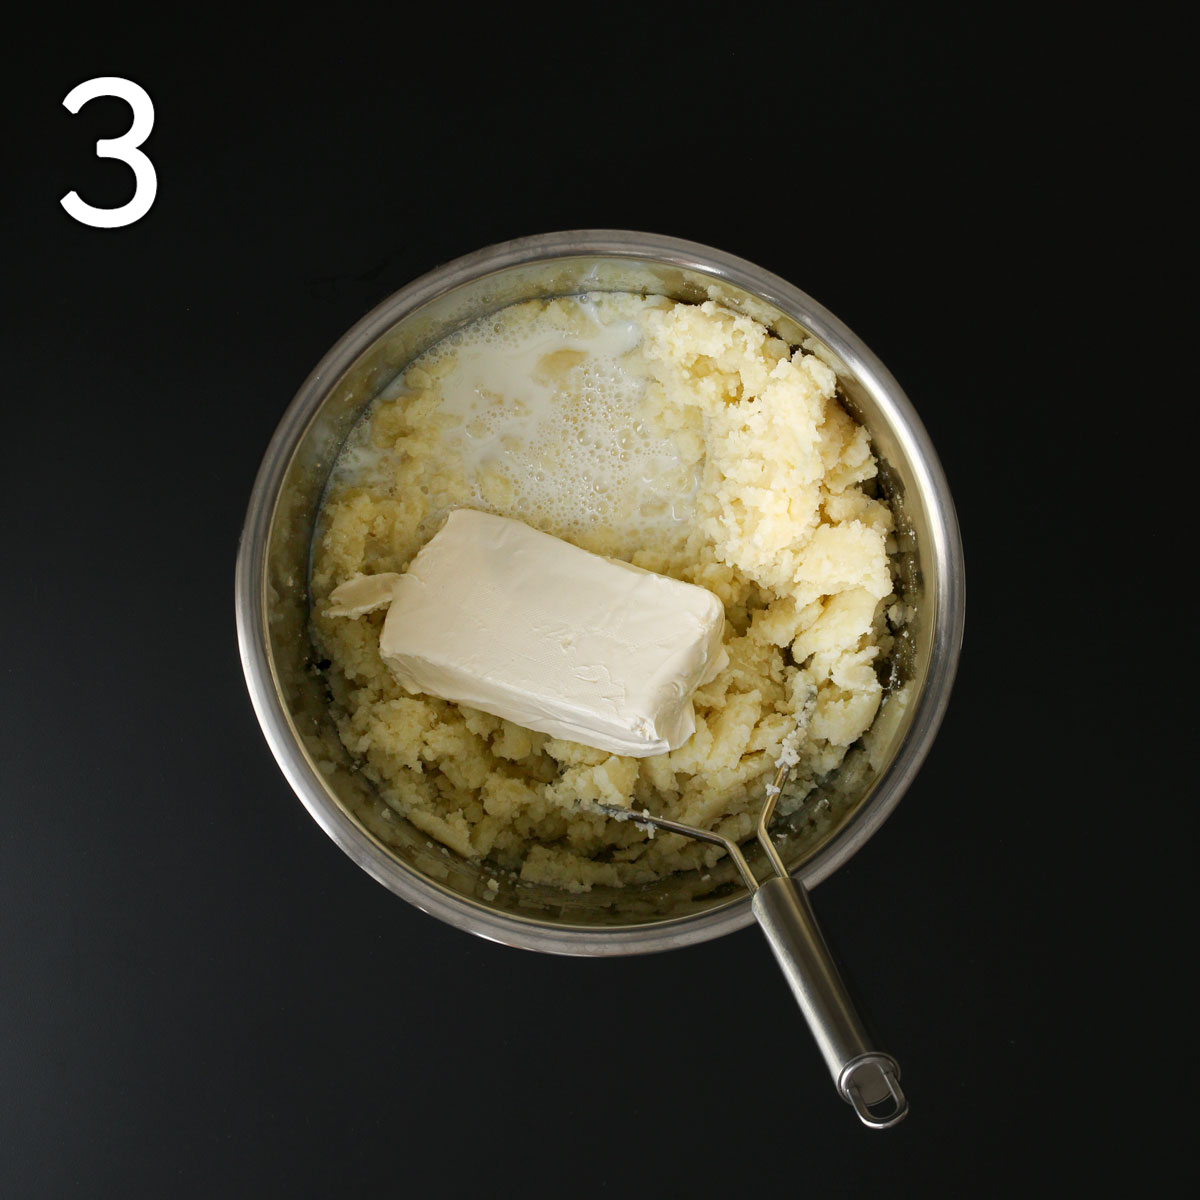 adding milk and cream cheese to the mashed potatoes in the pot.